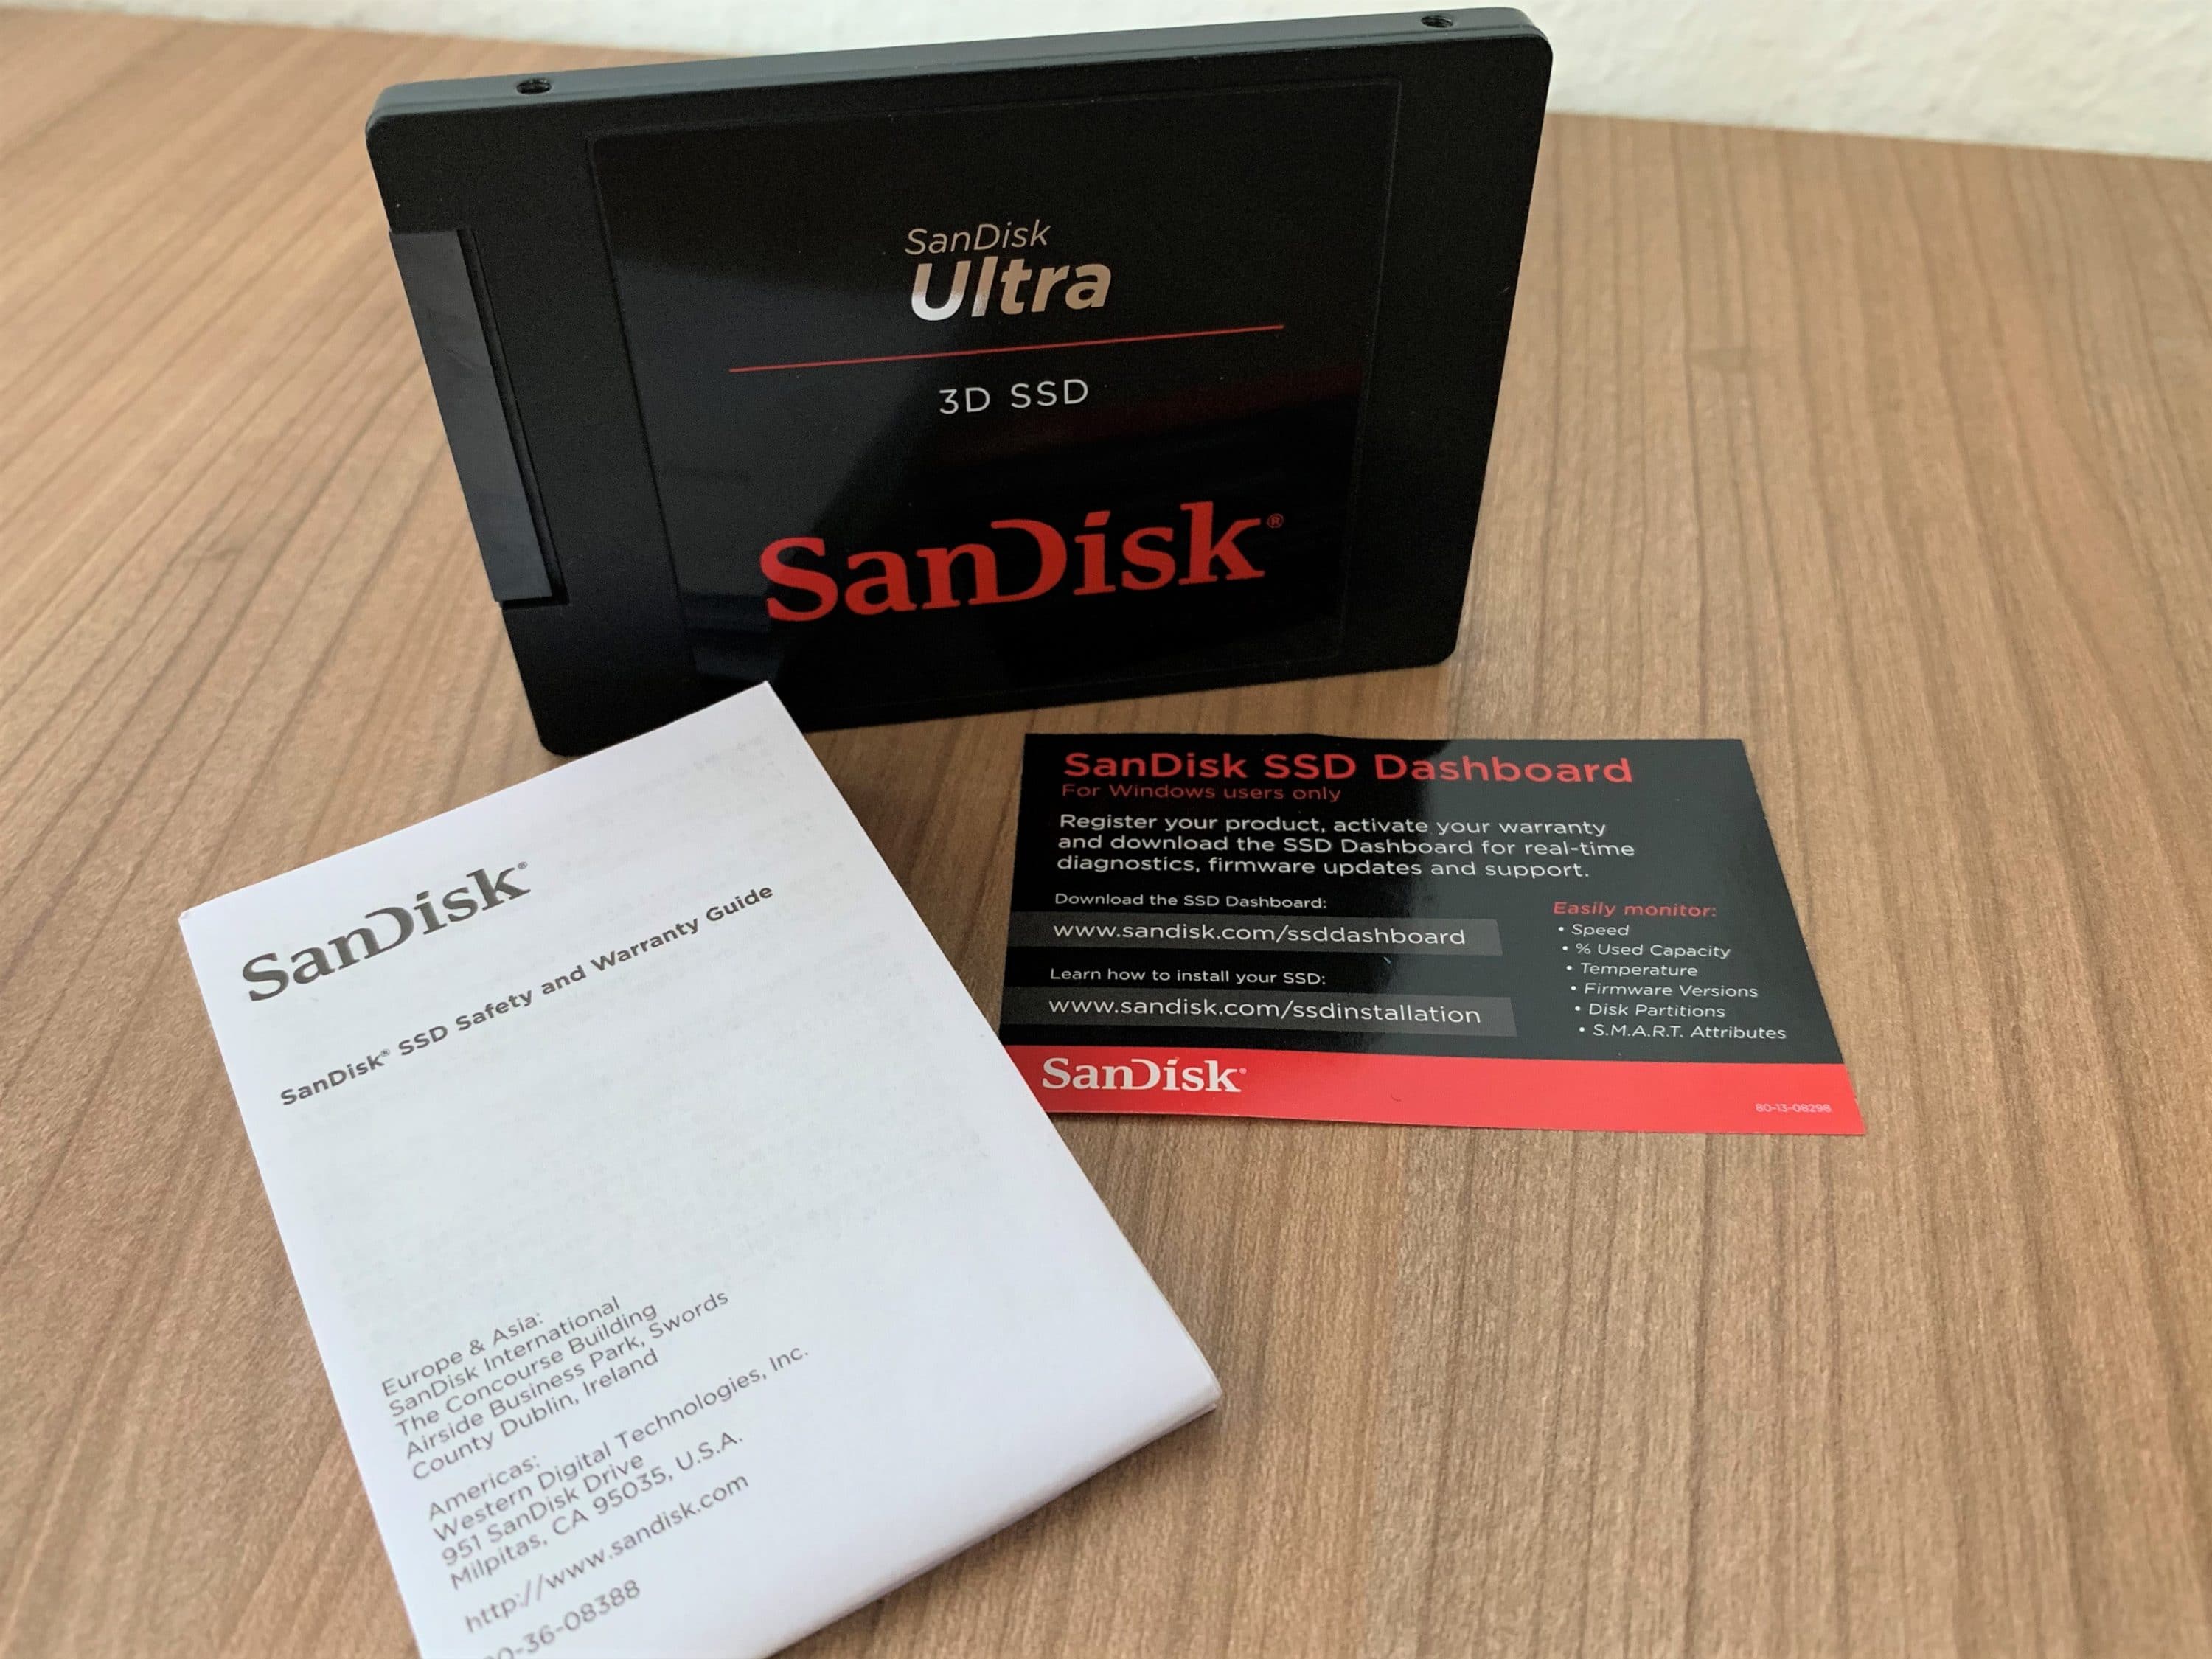 SanDisk Ultra 3D 500 GB SSD Review